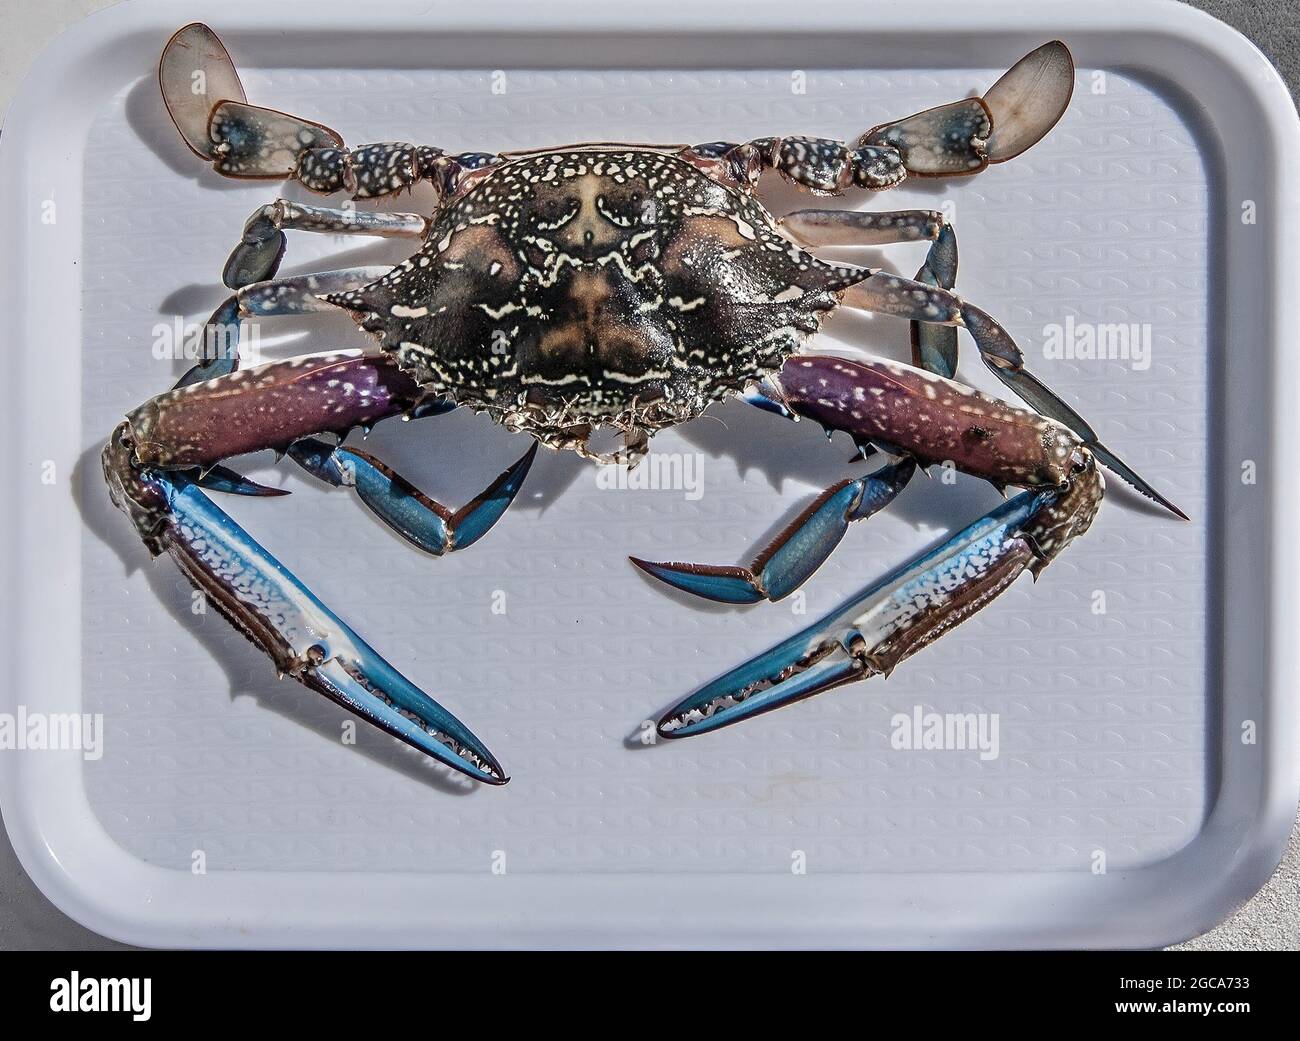 Tasty freshly caught Blue Swimmer Crab delicasy on a tray, Portunus armatus, also known as Sand, Flower and Blue Crab, ready for the cooking pot. Gosf Stock Photo